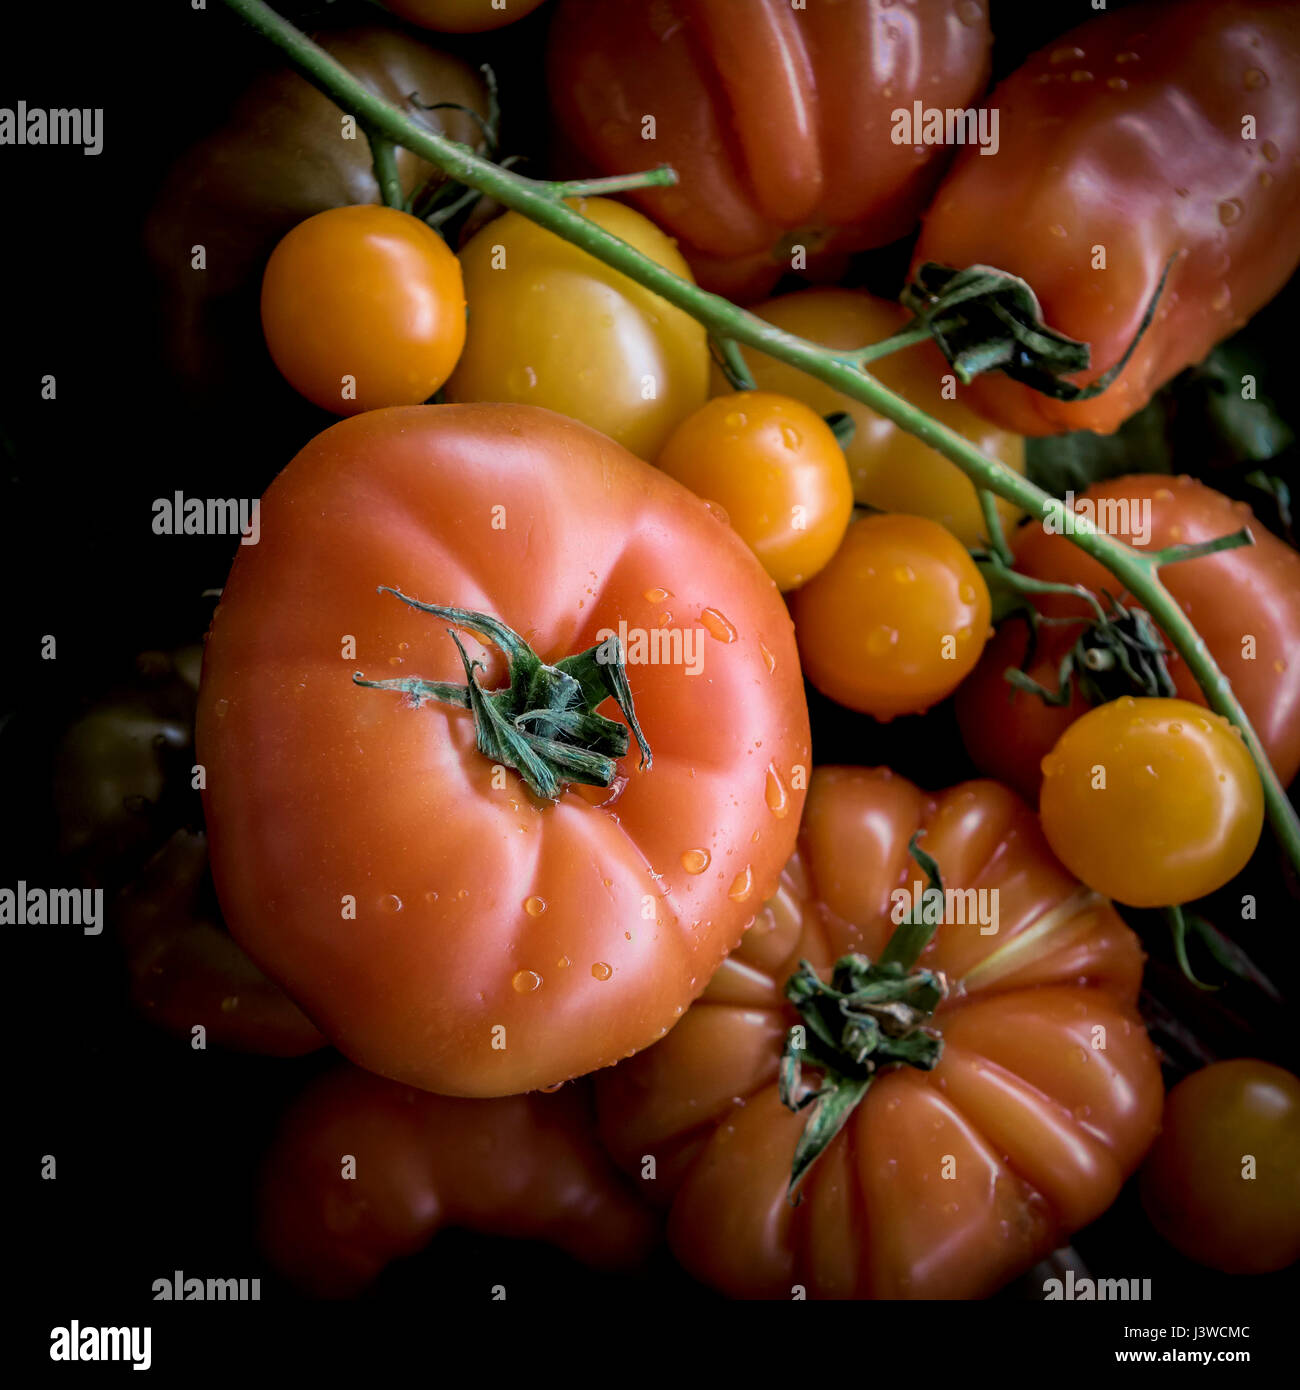 A closeup view of various types of tomatoes Fruit Food Ingredient Natural food Stock Photo